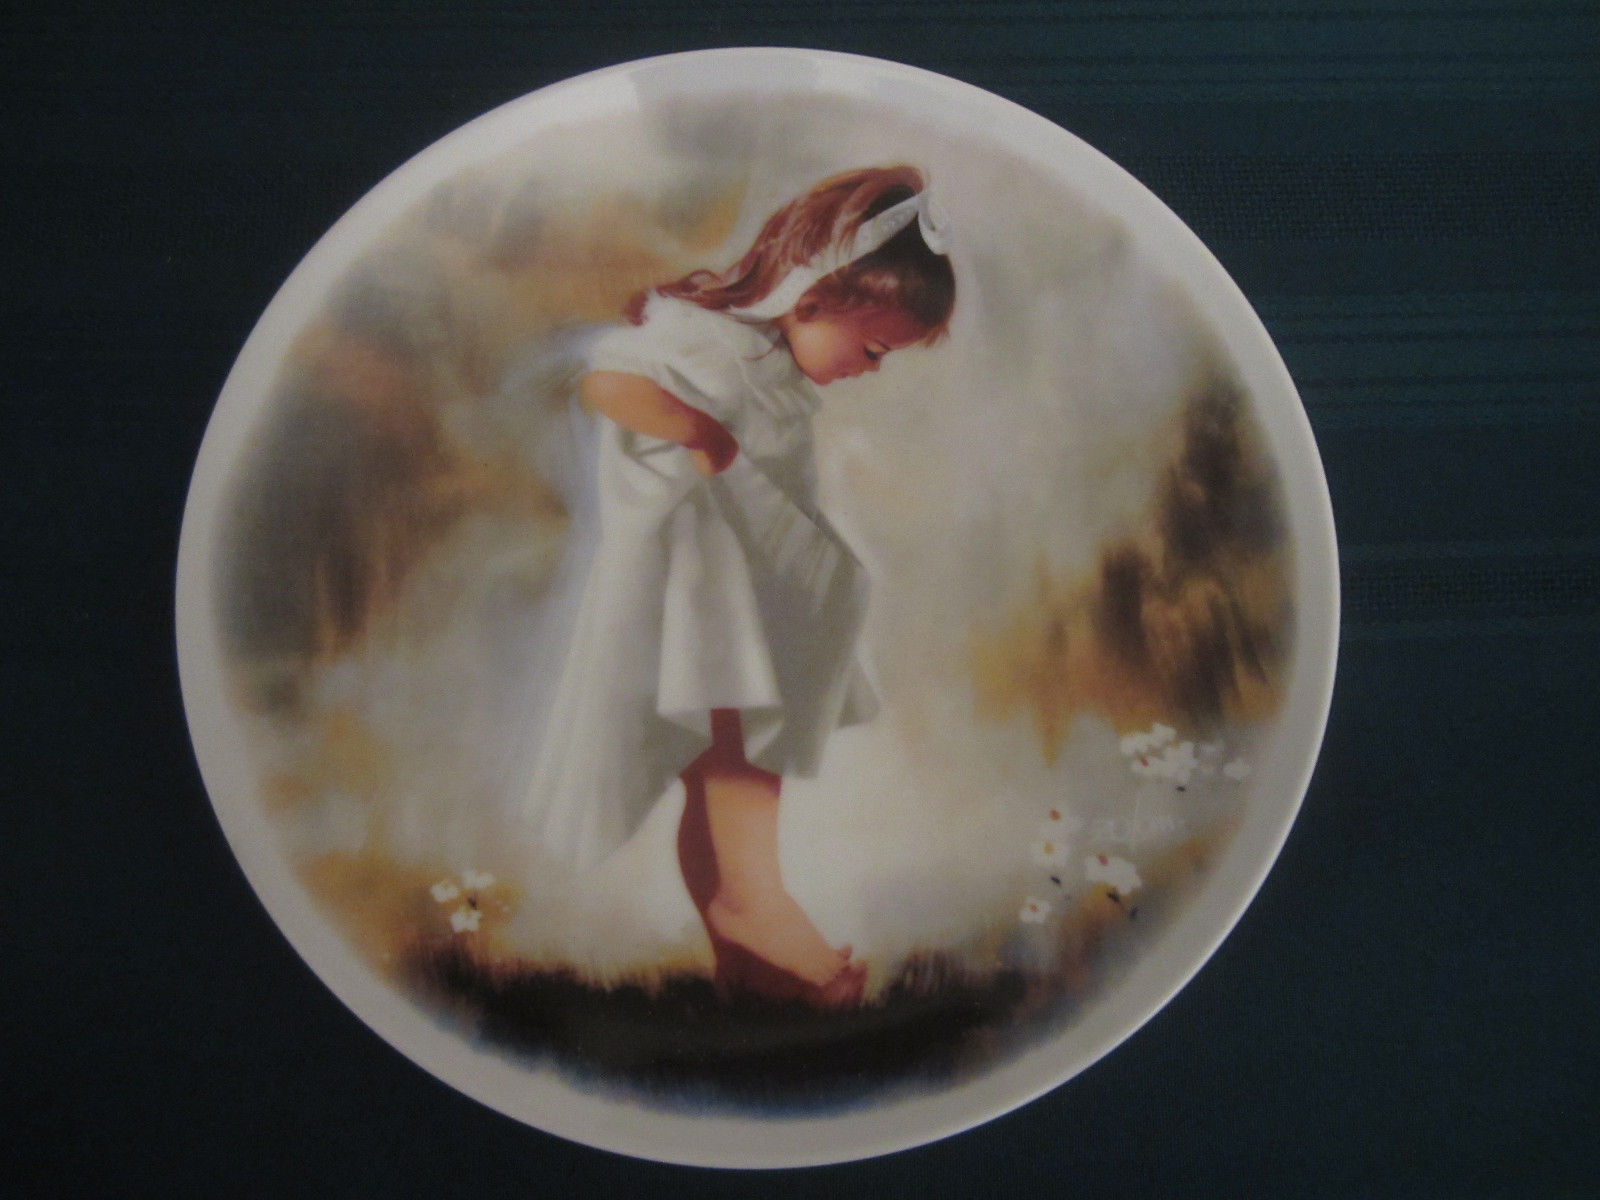 1990 KNowles  "Sharing" Collector Plate No.16855-A By Mimi Jobe Plate 